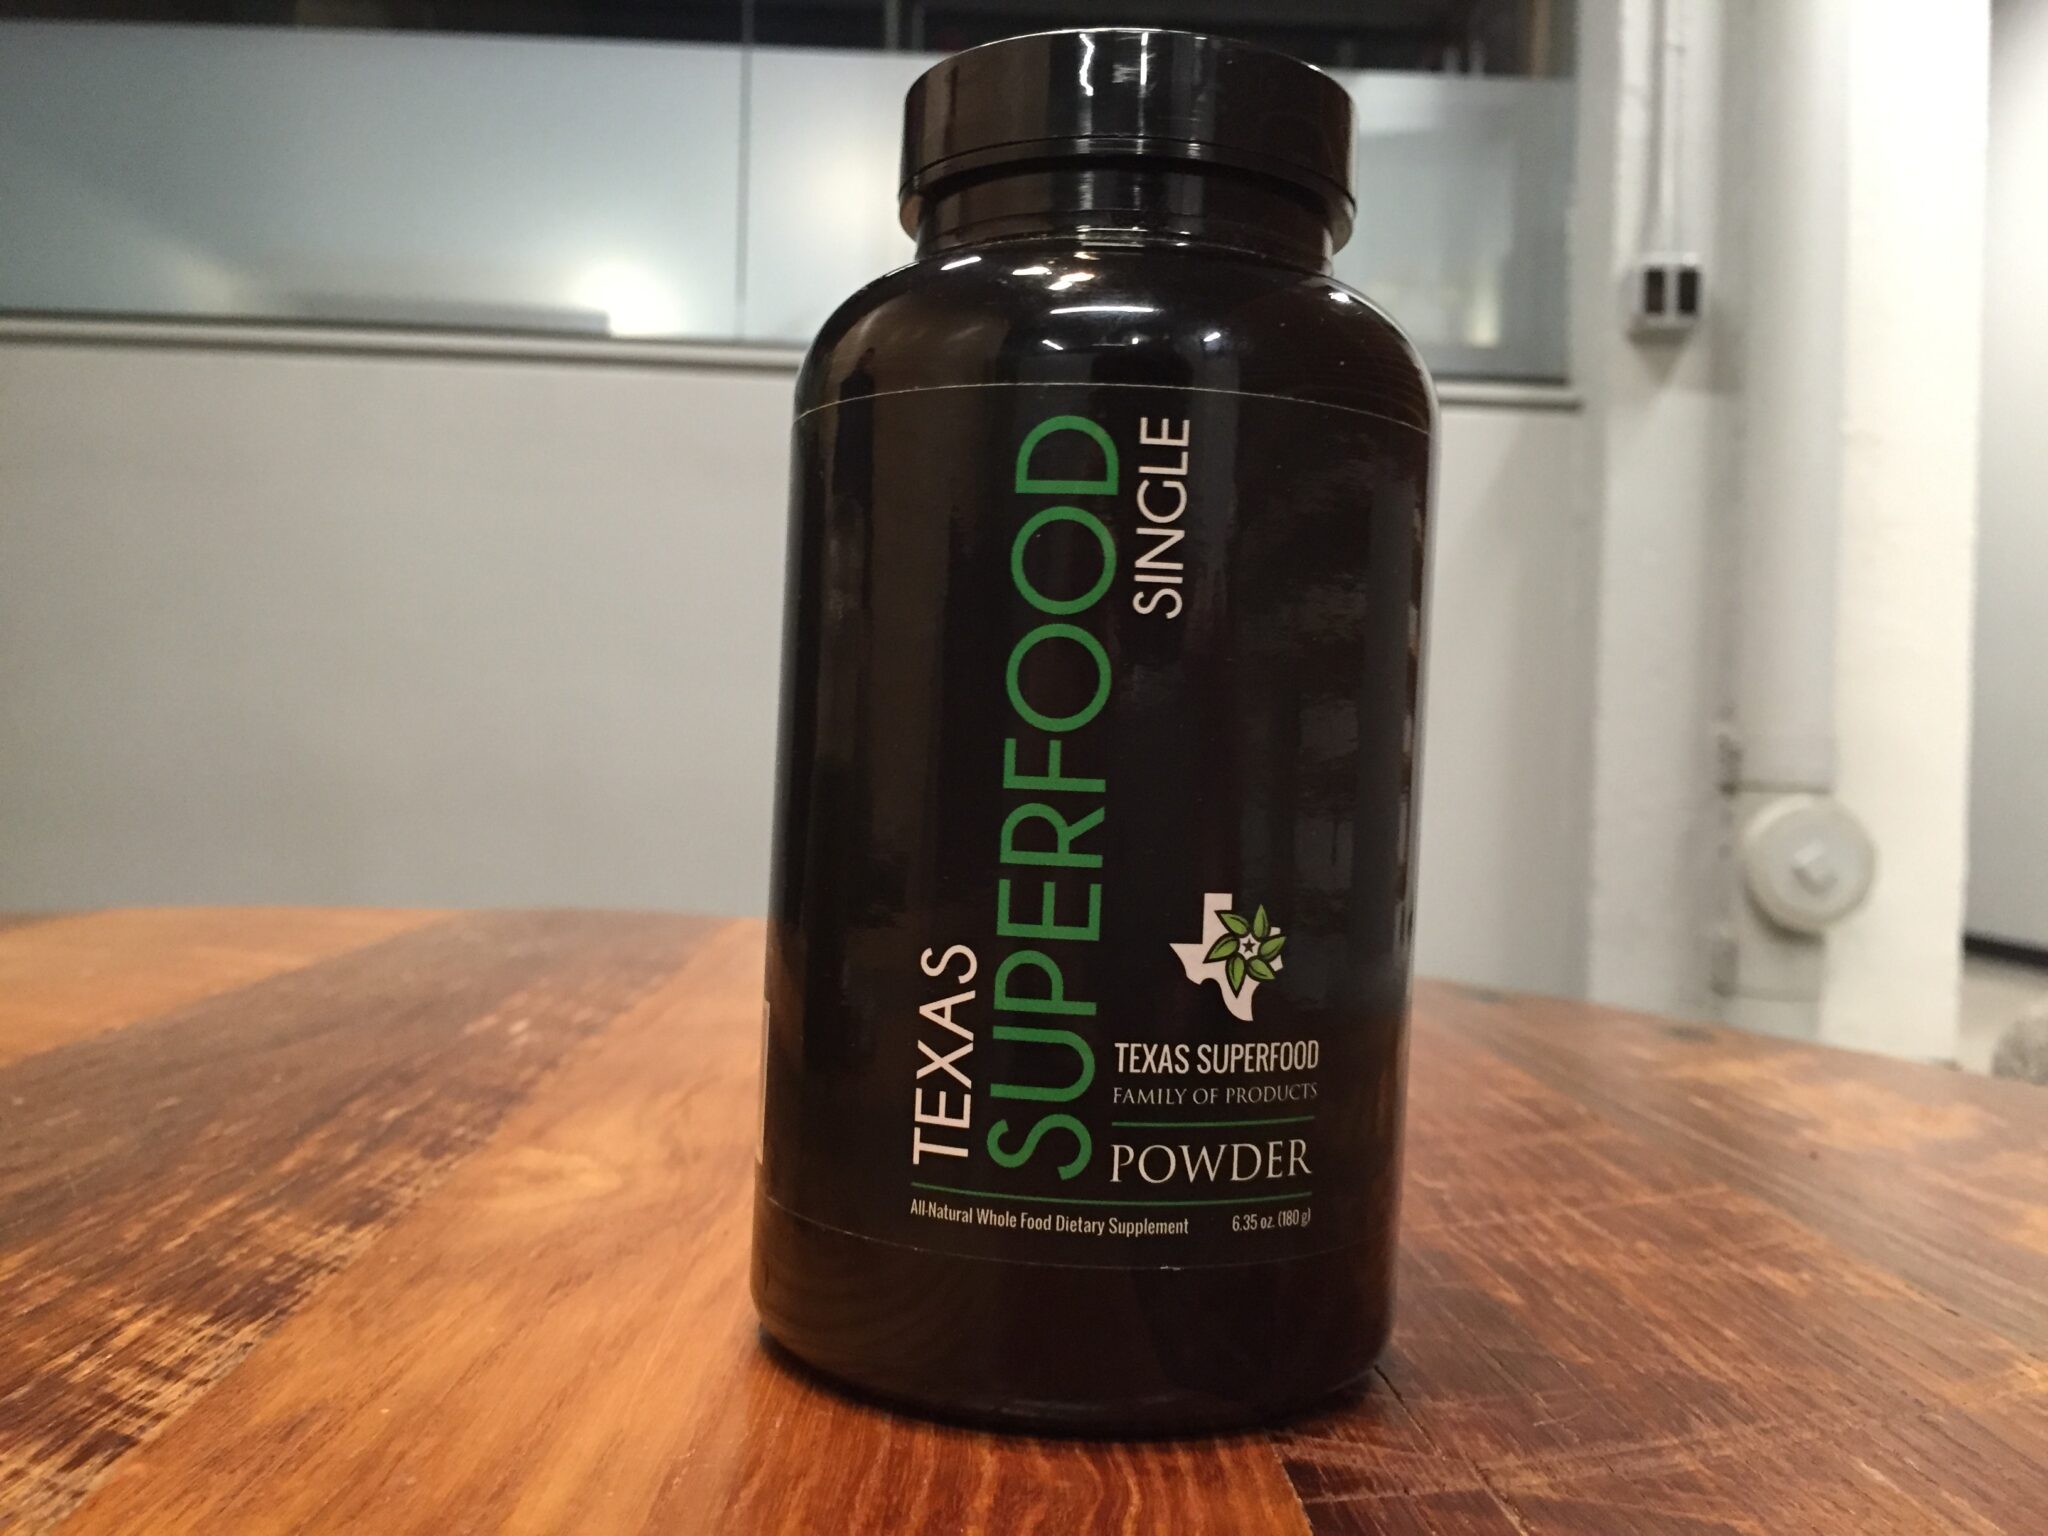 Texas Superfood Review 2021 - Does It Work?